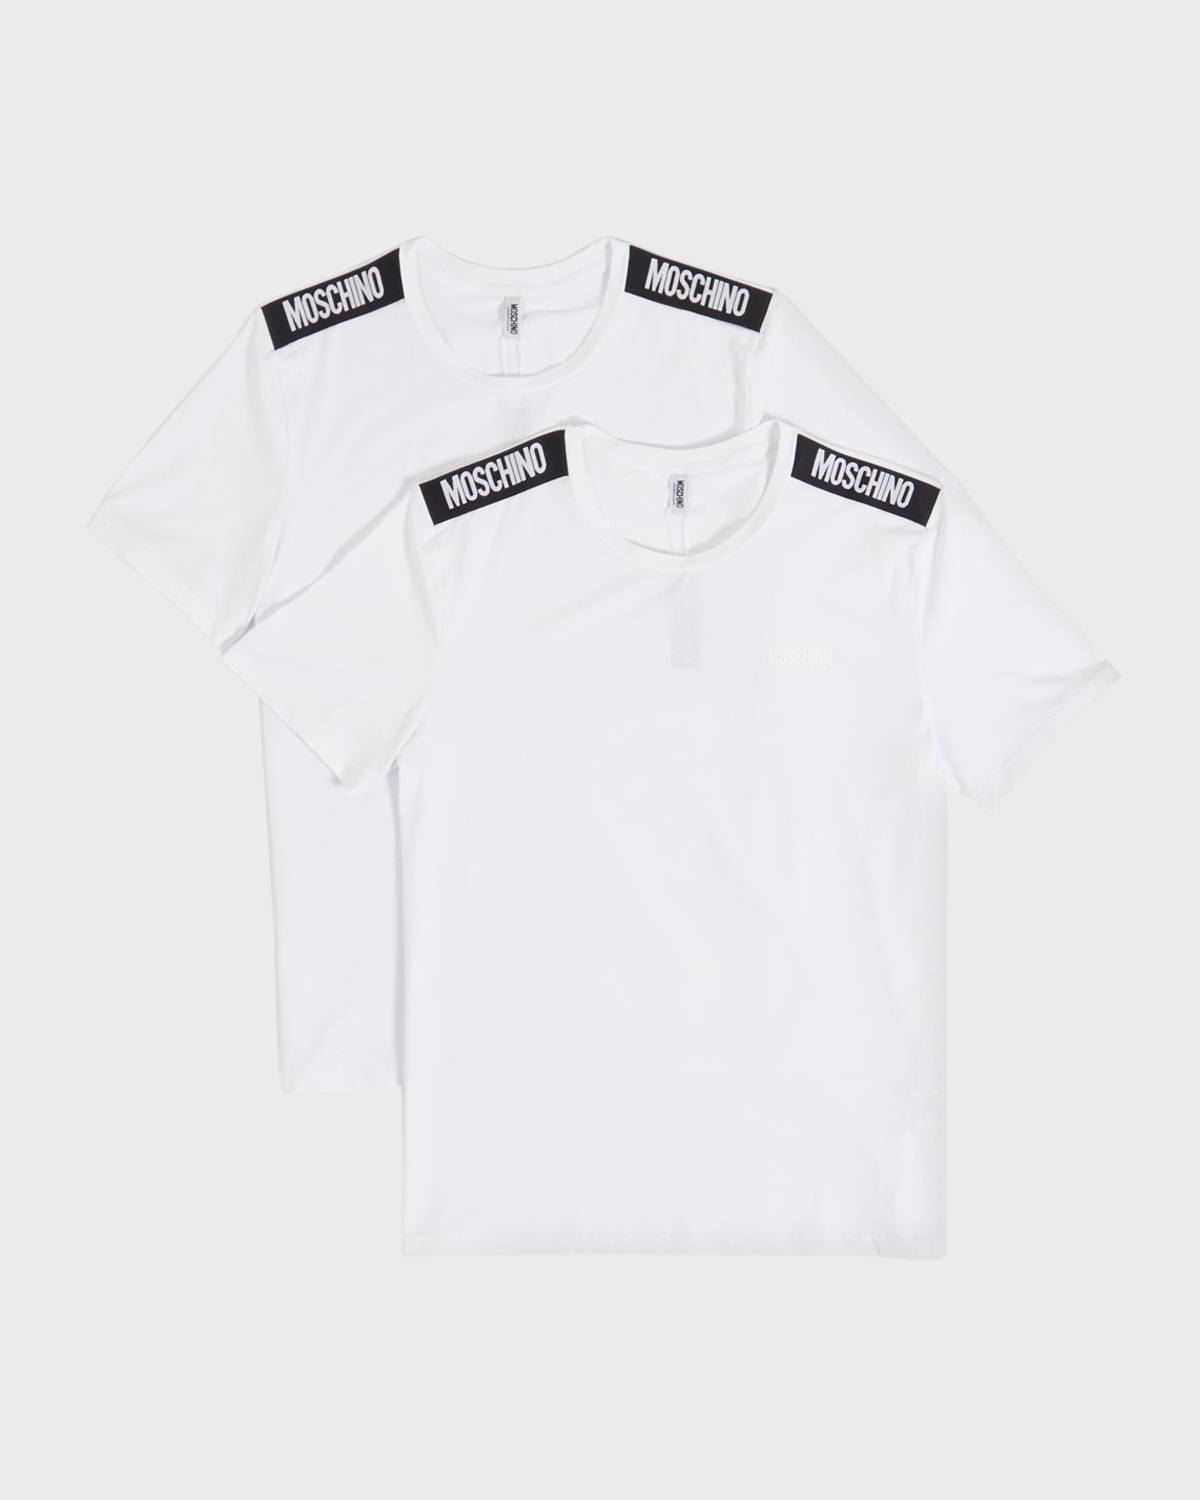 Moschino Men's T-shirt With Shoulder Taping In White